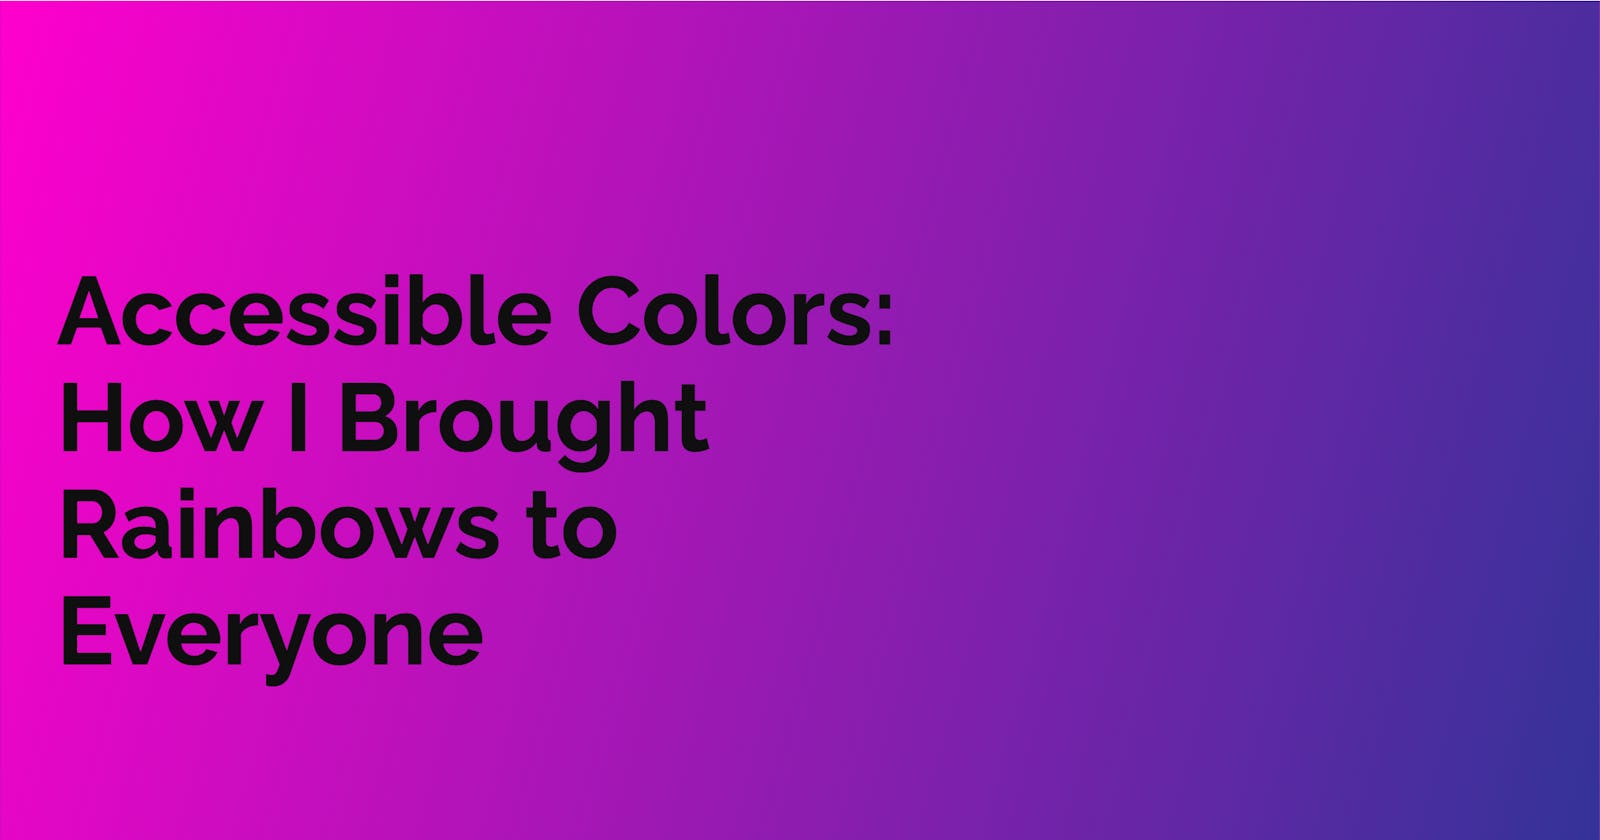 Accessible Colors: How I Brought Rainbows to Everyone